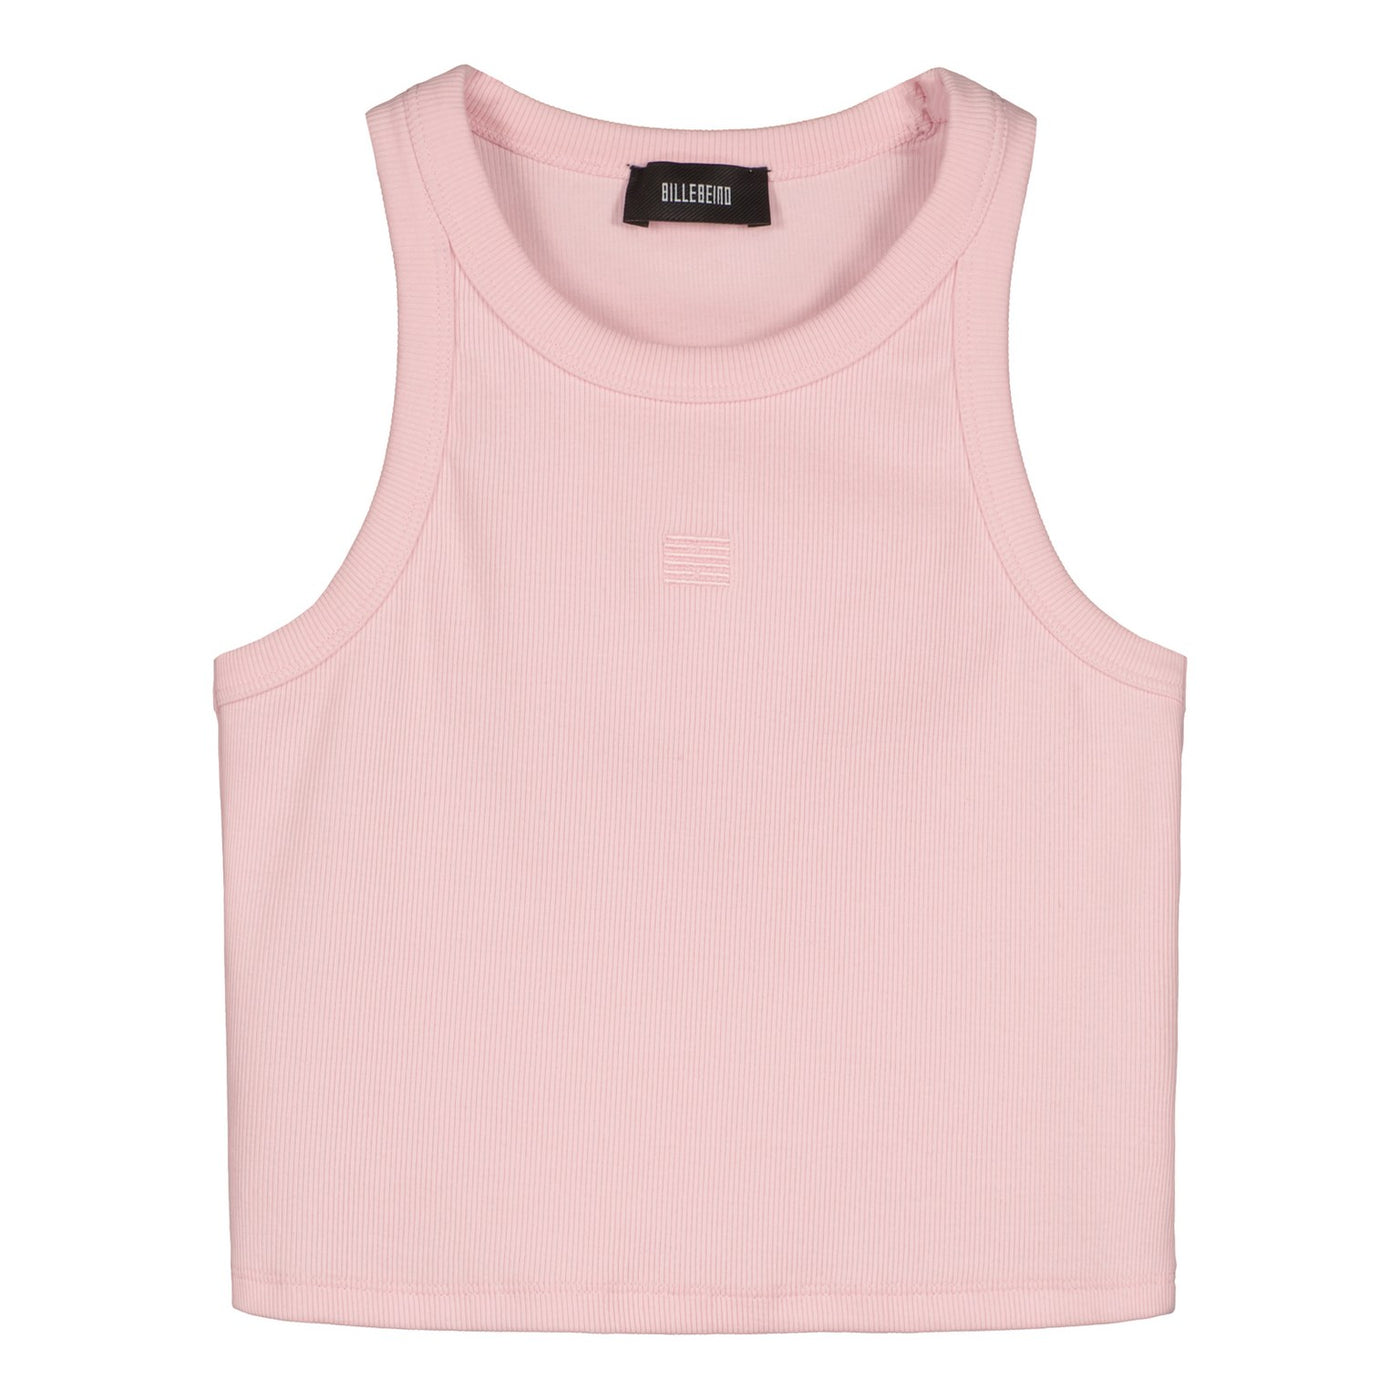 CROPPED TANK TOP